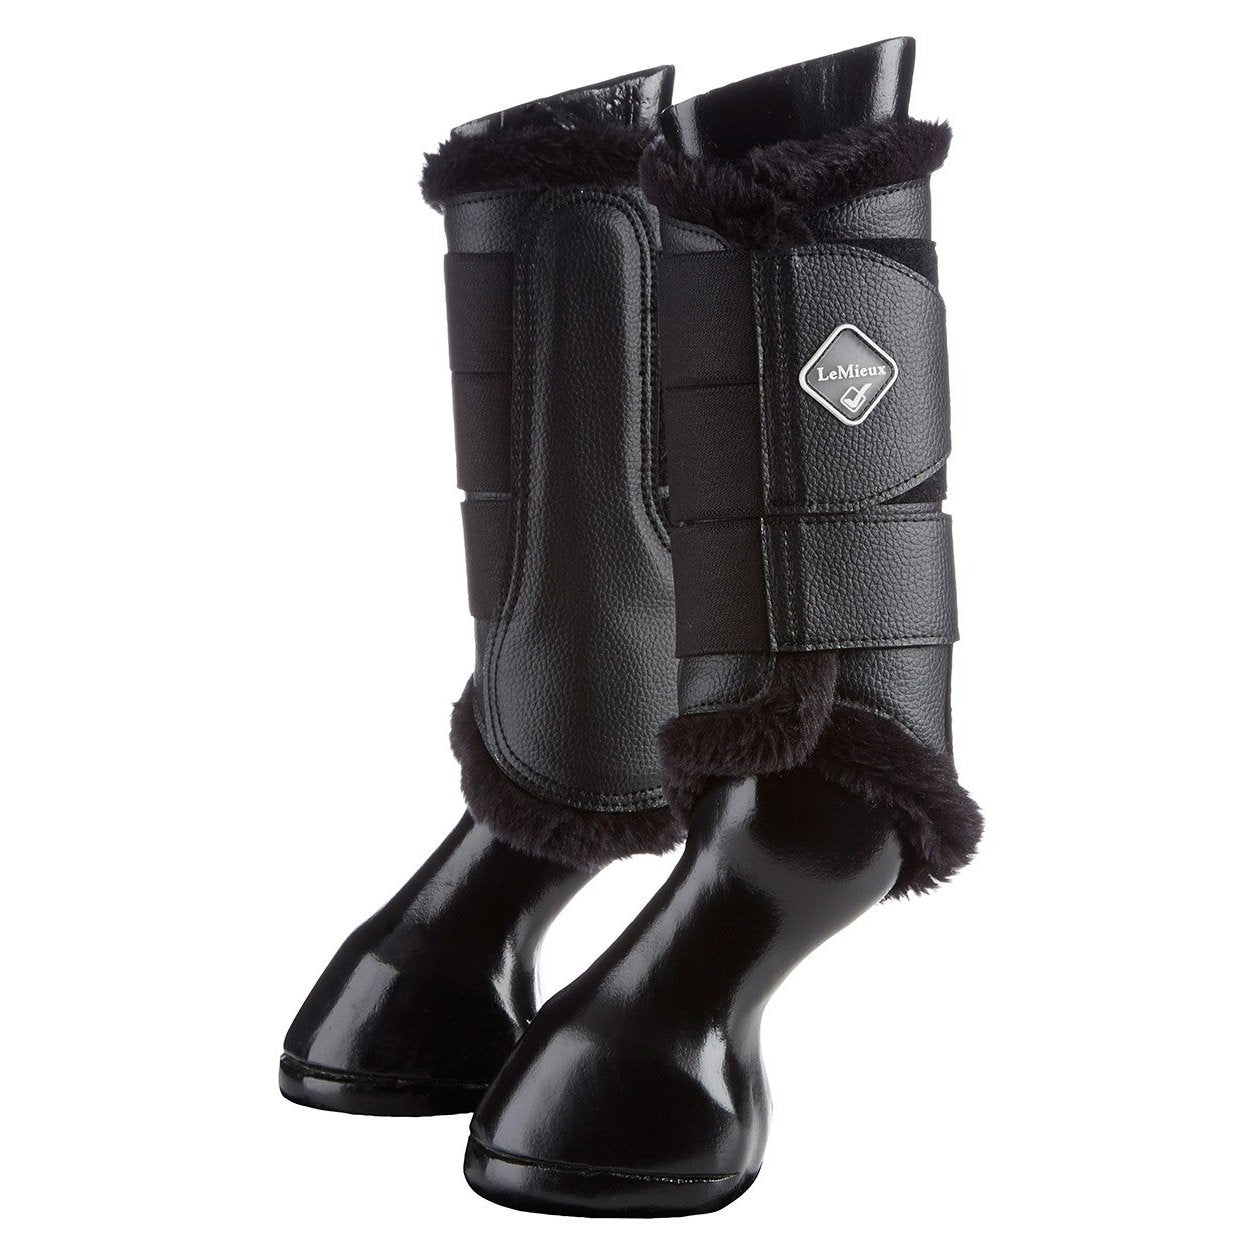 tendon boots for horses